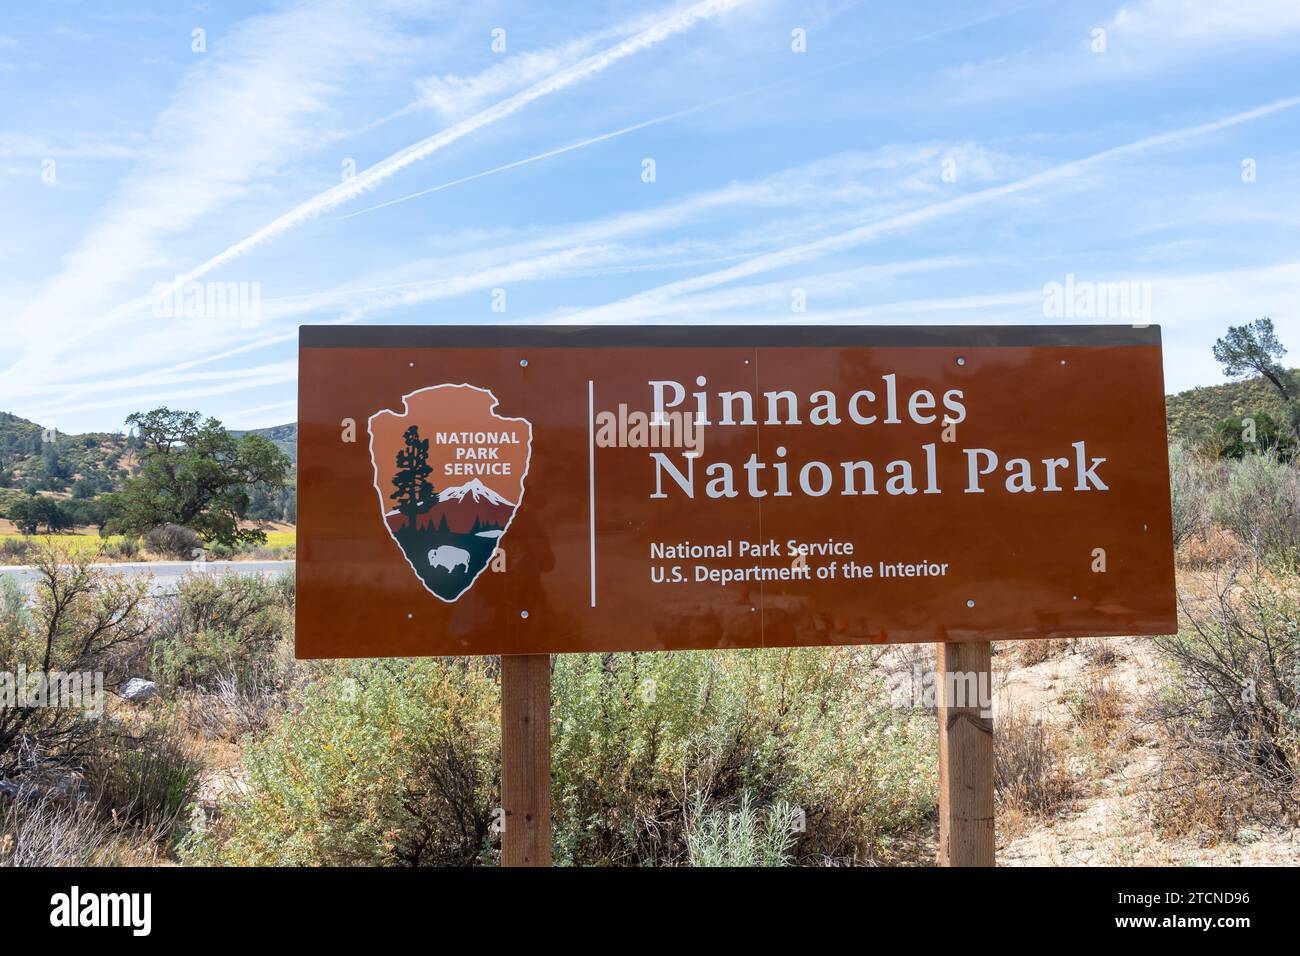 Pinnacles National Park sign is seen in California, USA Stock Photo